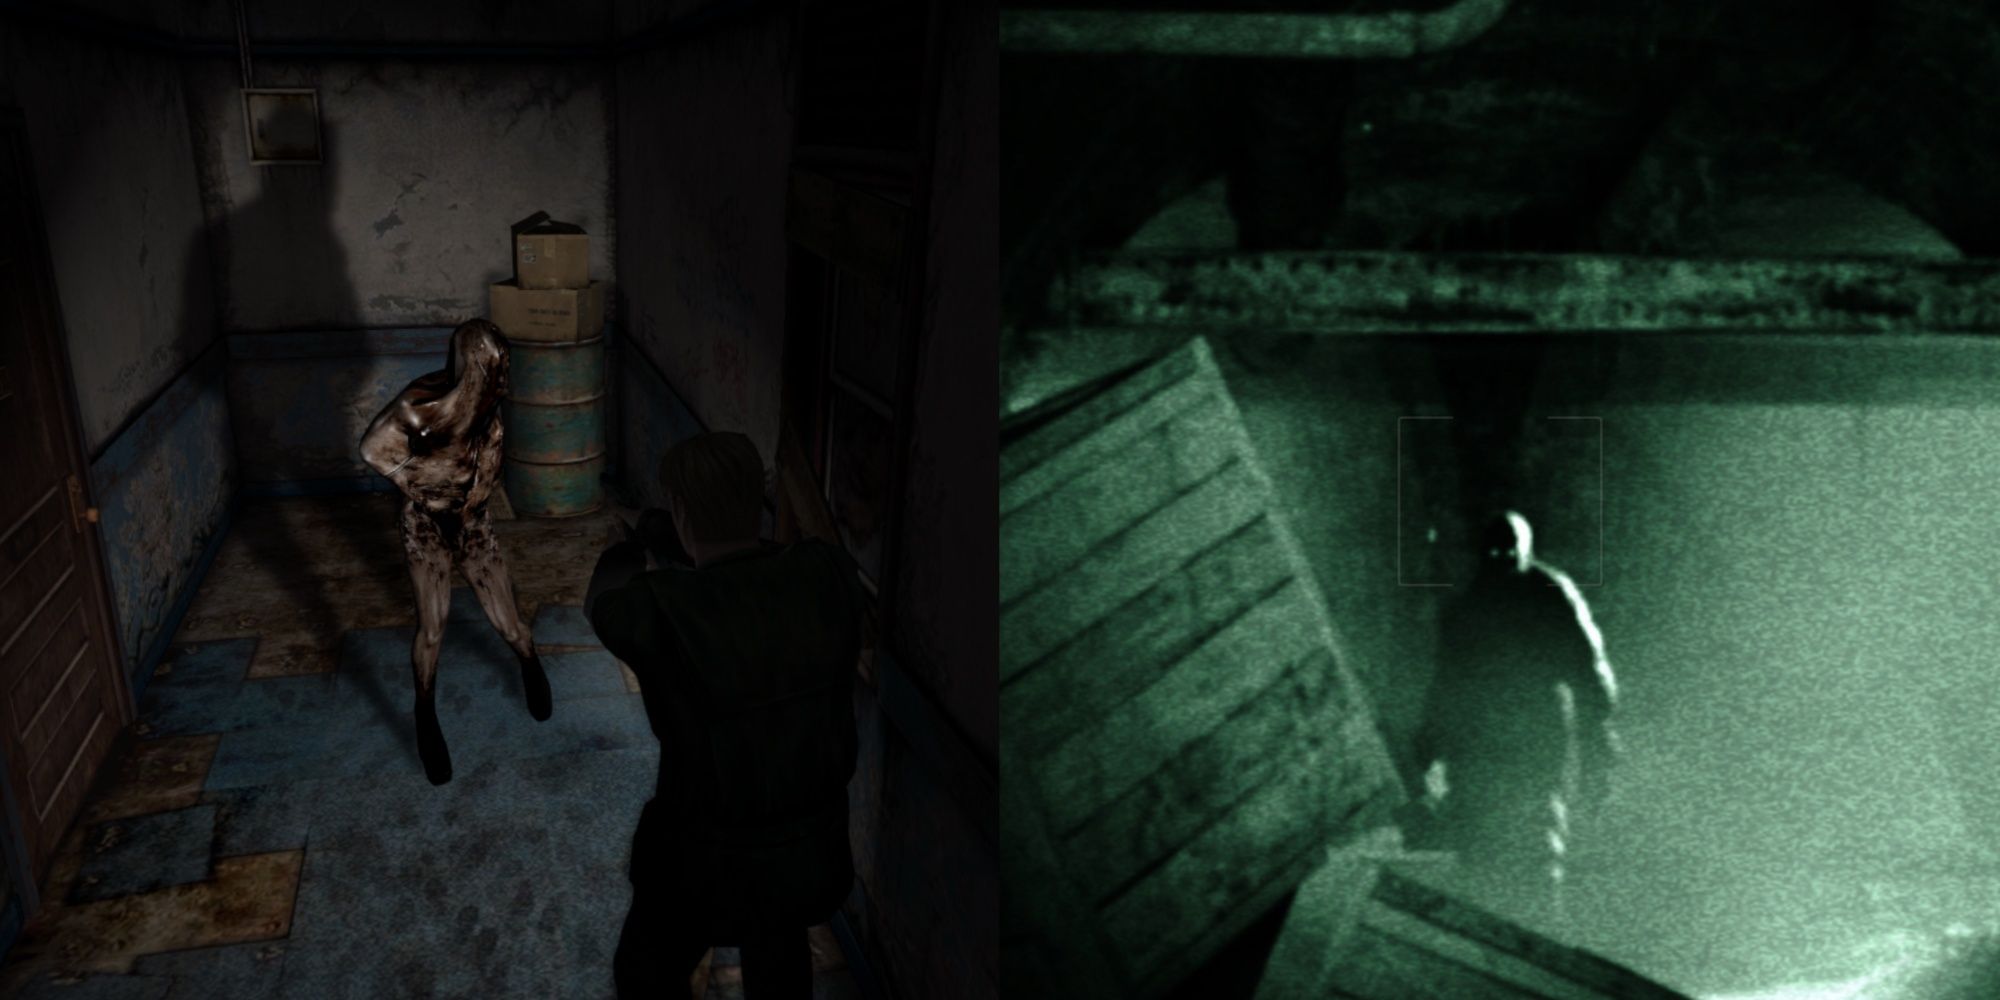 ALL Original vs New Fixed Scary Project: Playtime Jumpscares Comparison 